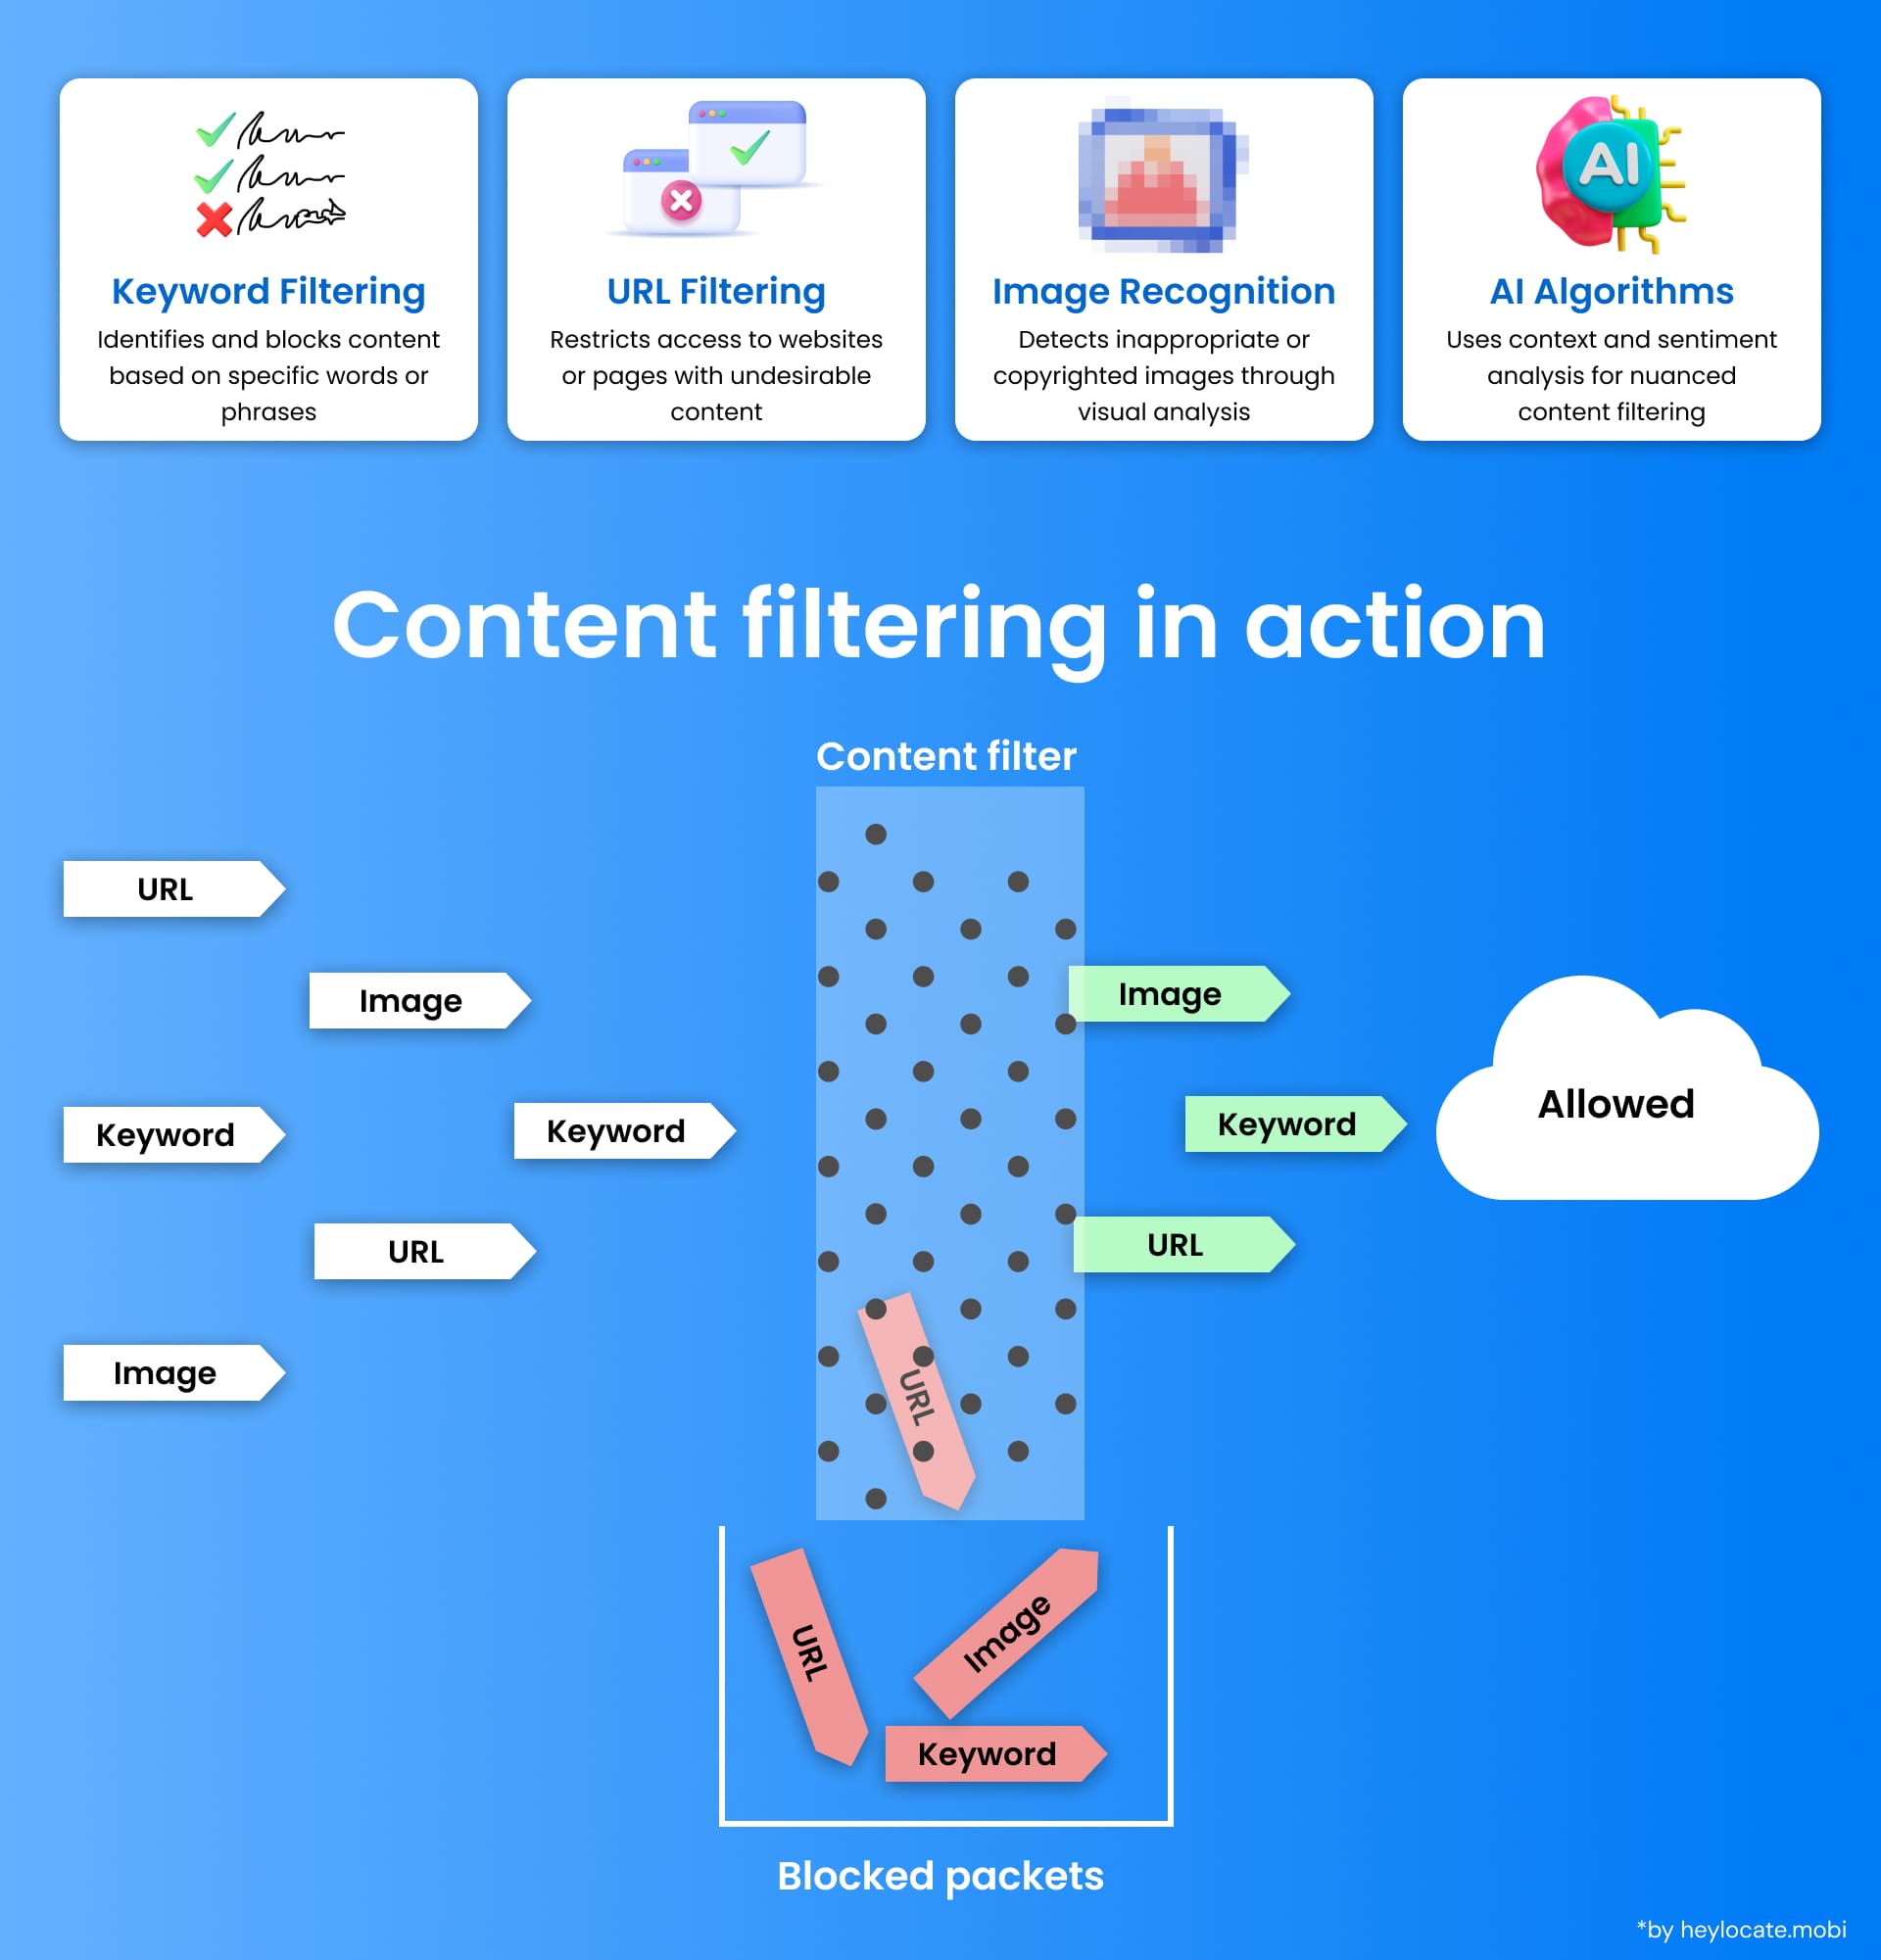 An infographic showing "content filtering in action" using various techniques: keyword filtering, URL filtering, image recognition, and artificial intelligence algorithms. It shows content filtering in action: some content does not pass the conditions and ends up in the blocked category; the allowed content ends up in the cloud, symbolizing the accepted data